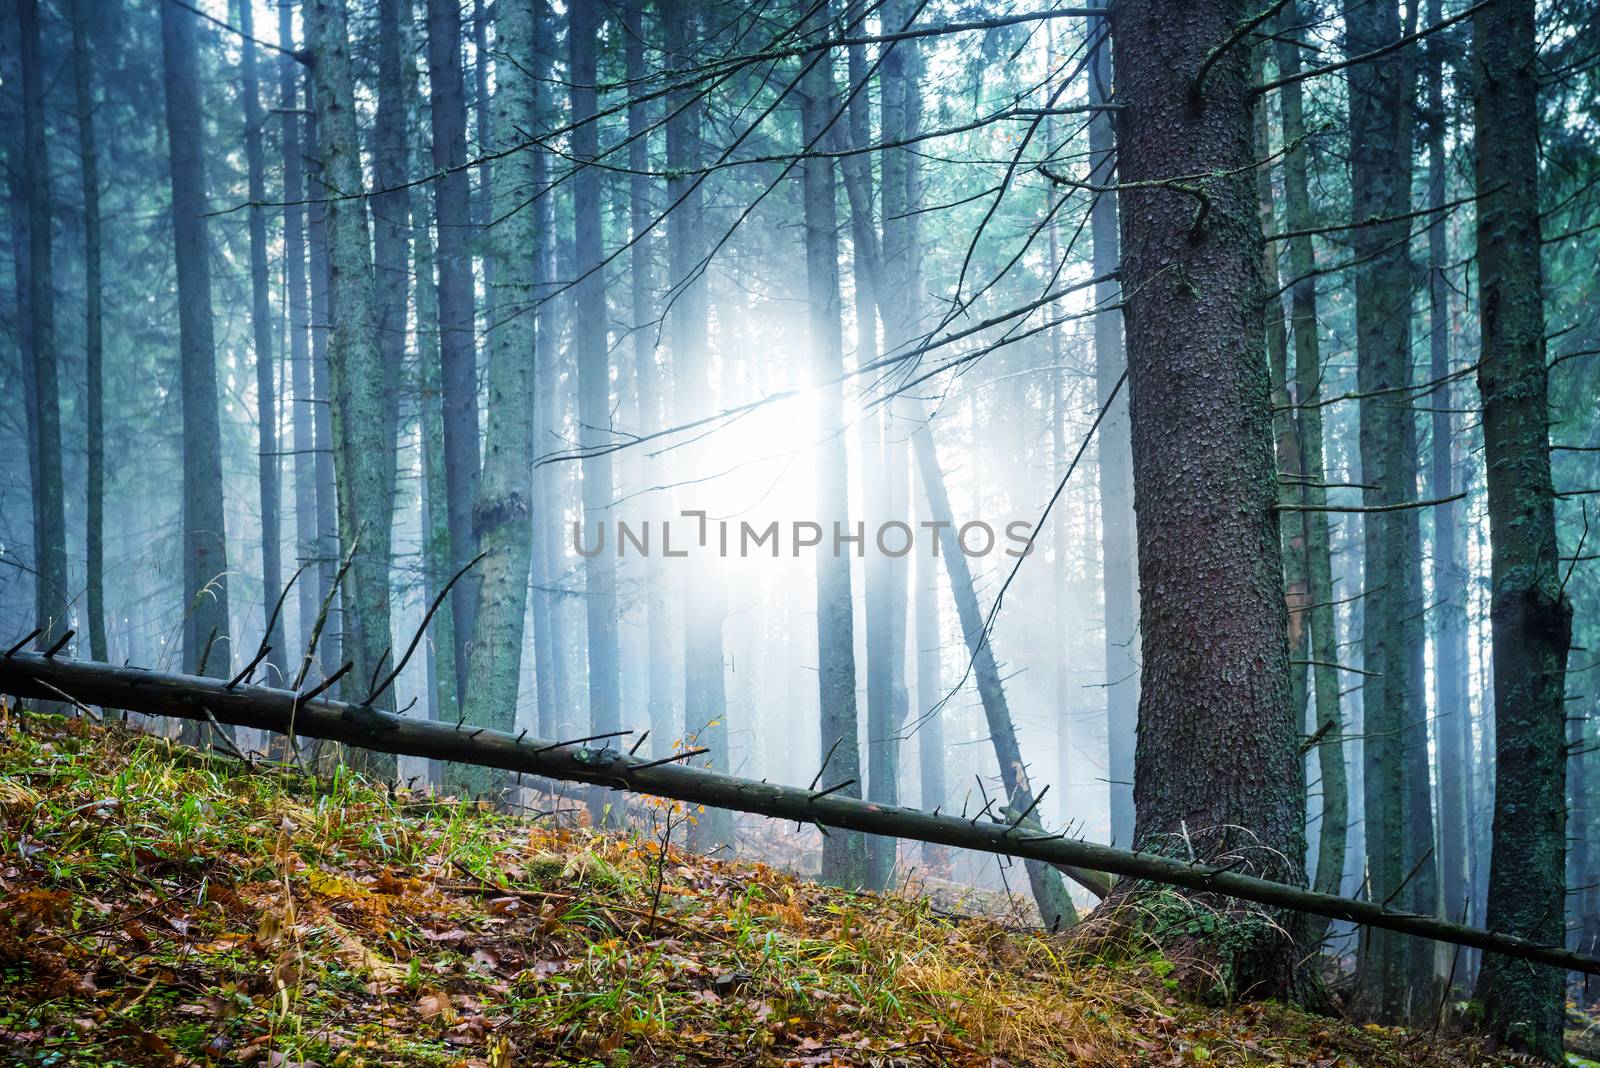 Mysterious fog in the green forest with pines. Sun shining through trees.